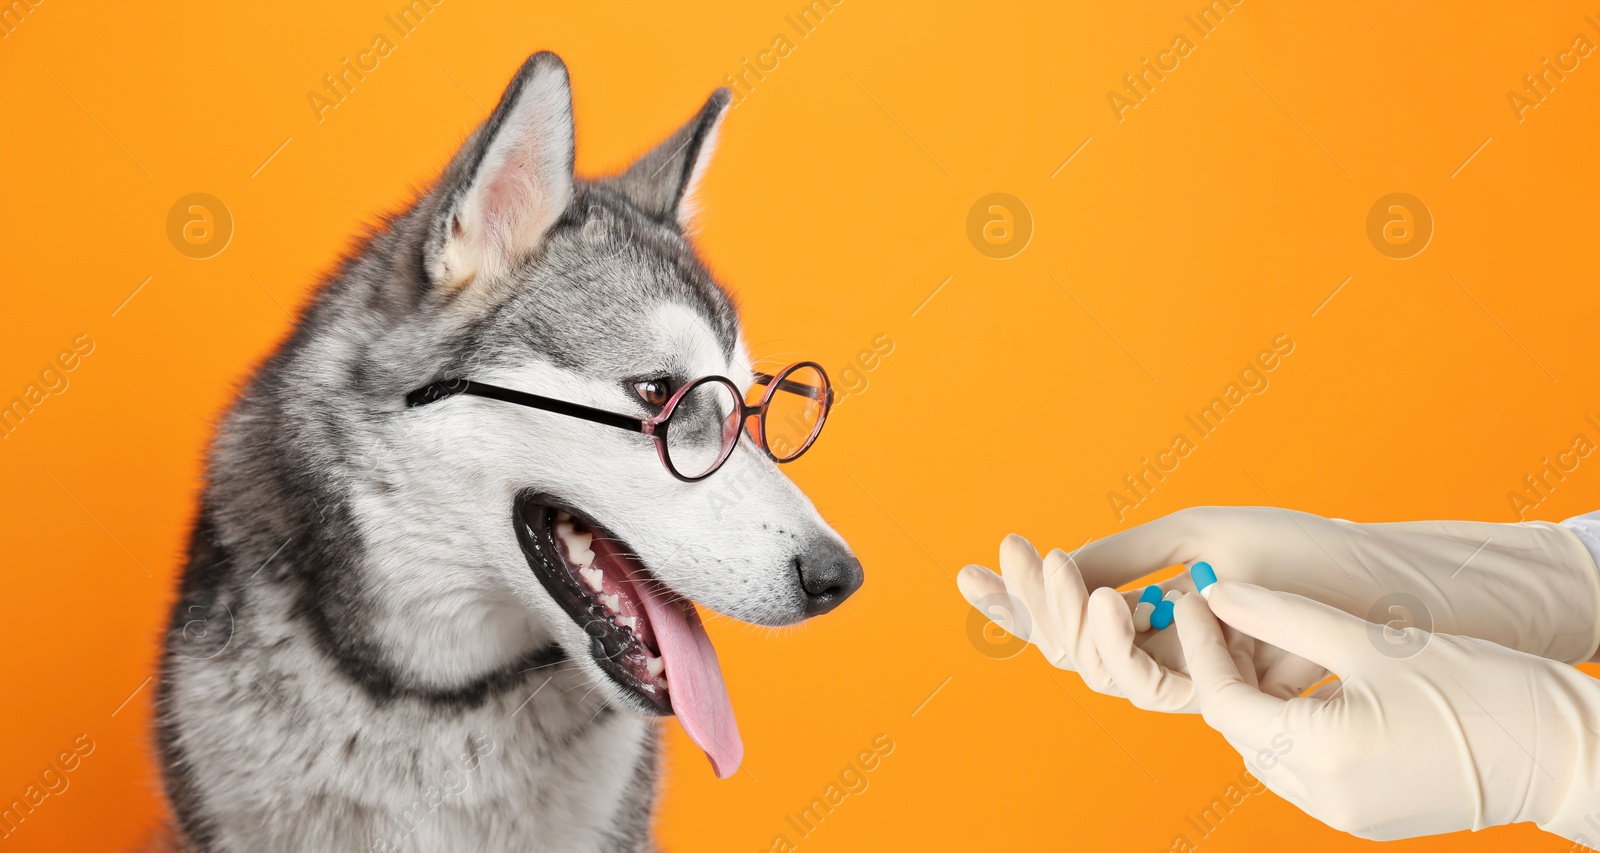 Image of Deworming. Veterinarian with anthelmintic drug and cute Alaskan Malamute dog on orange background, closeup